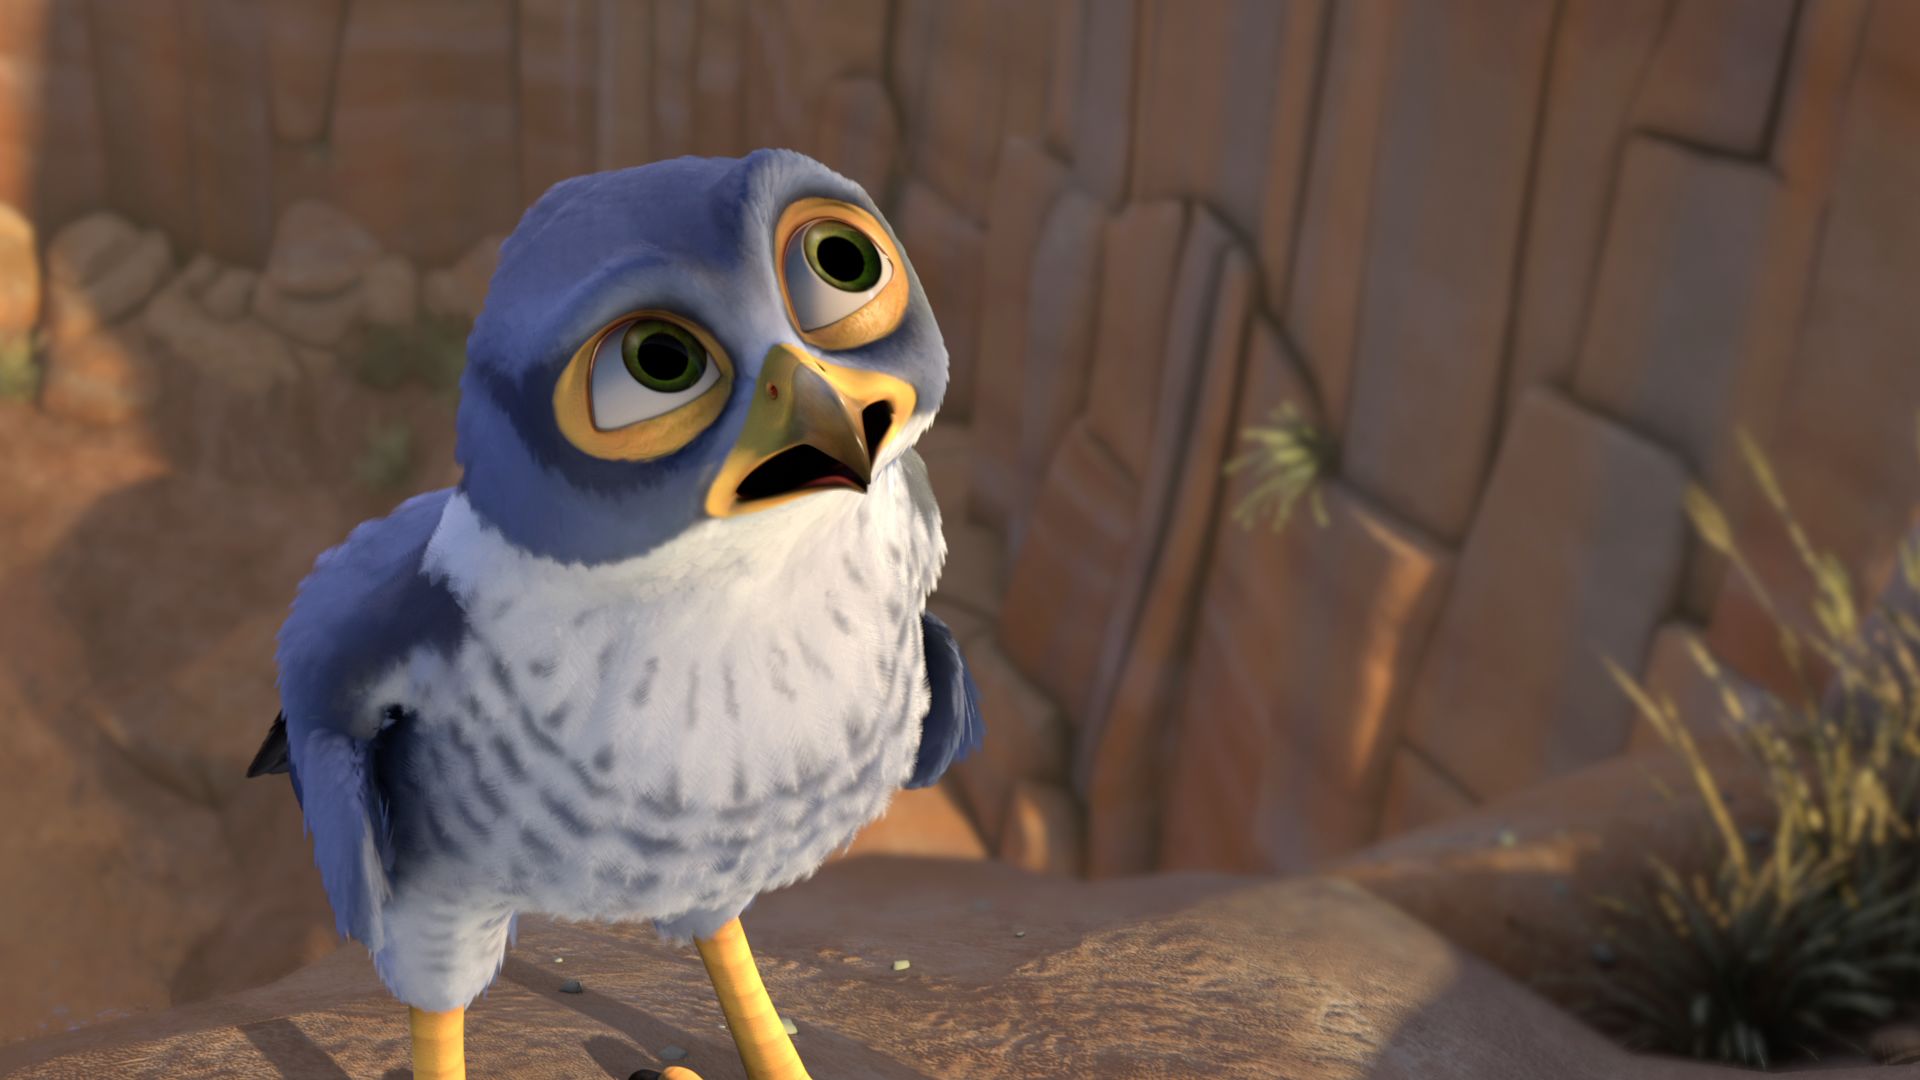 Zambezia': 3D animation puts South Africa film in the picture | CNN